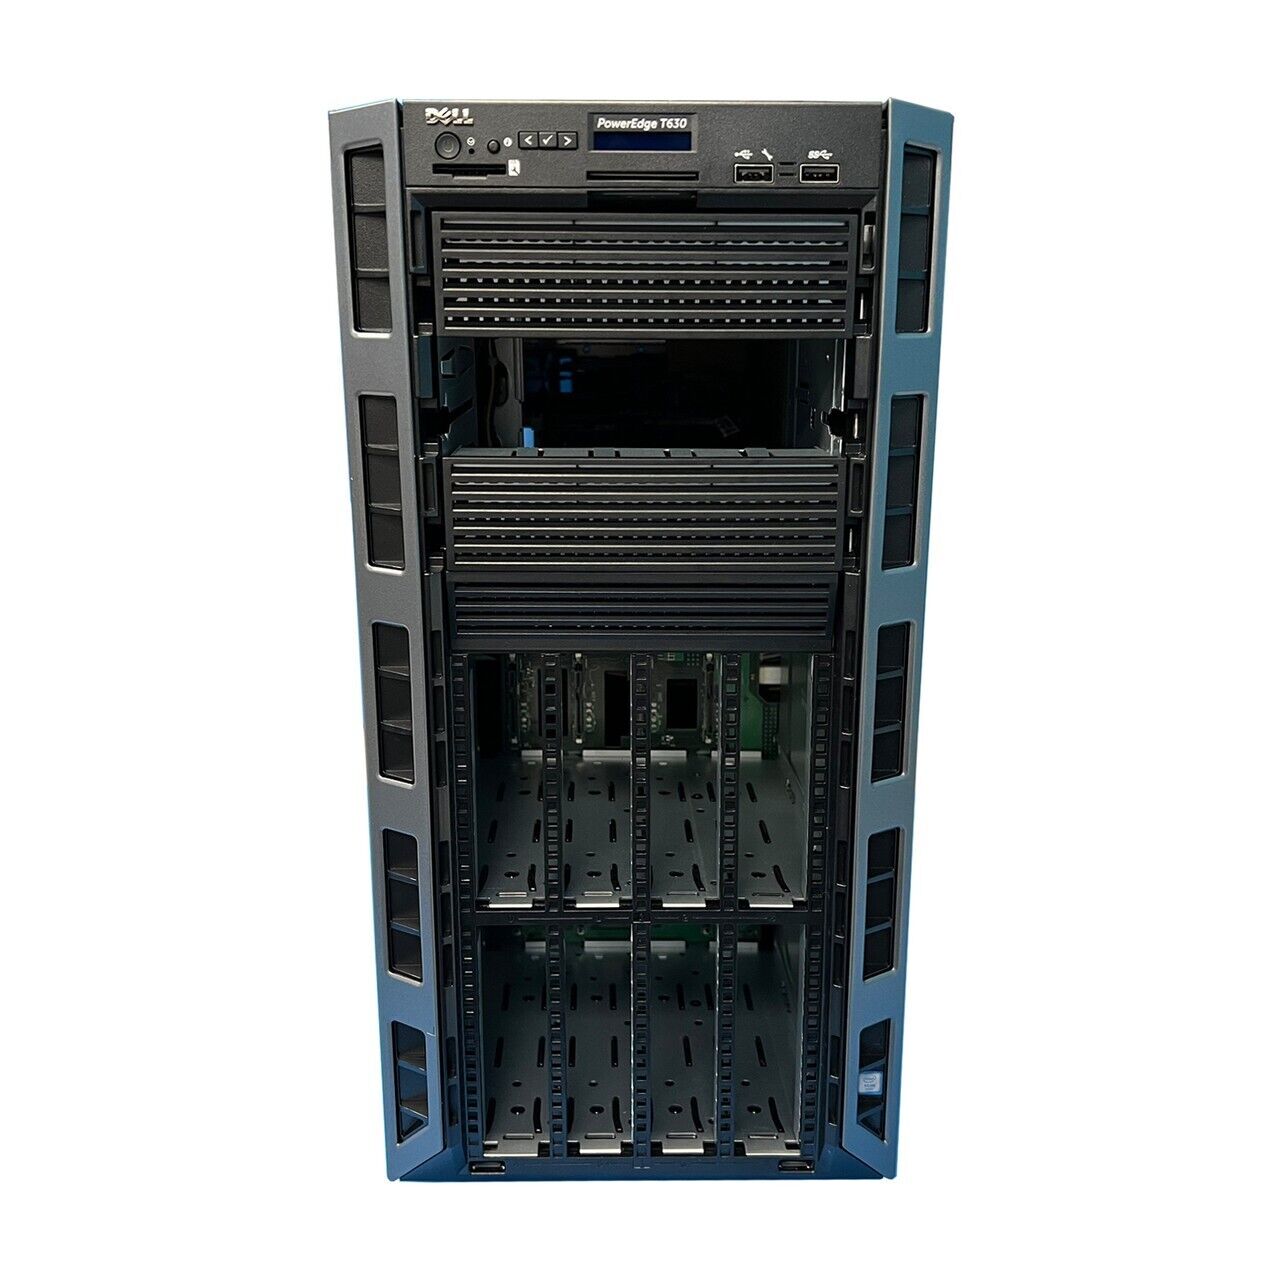 New PowerEdge T630 Tower Server Replacement Chassis